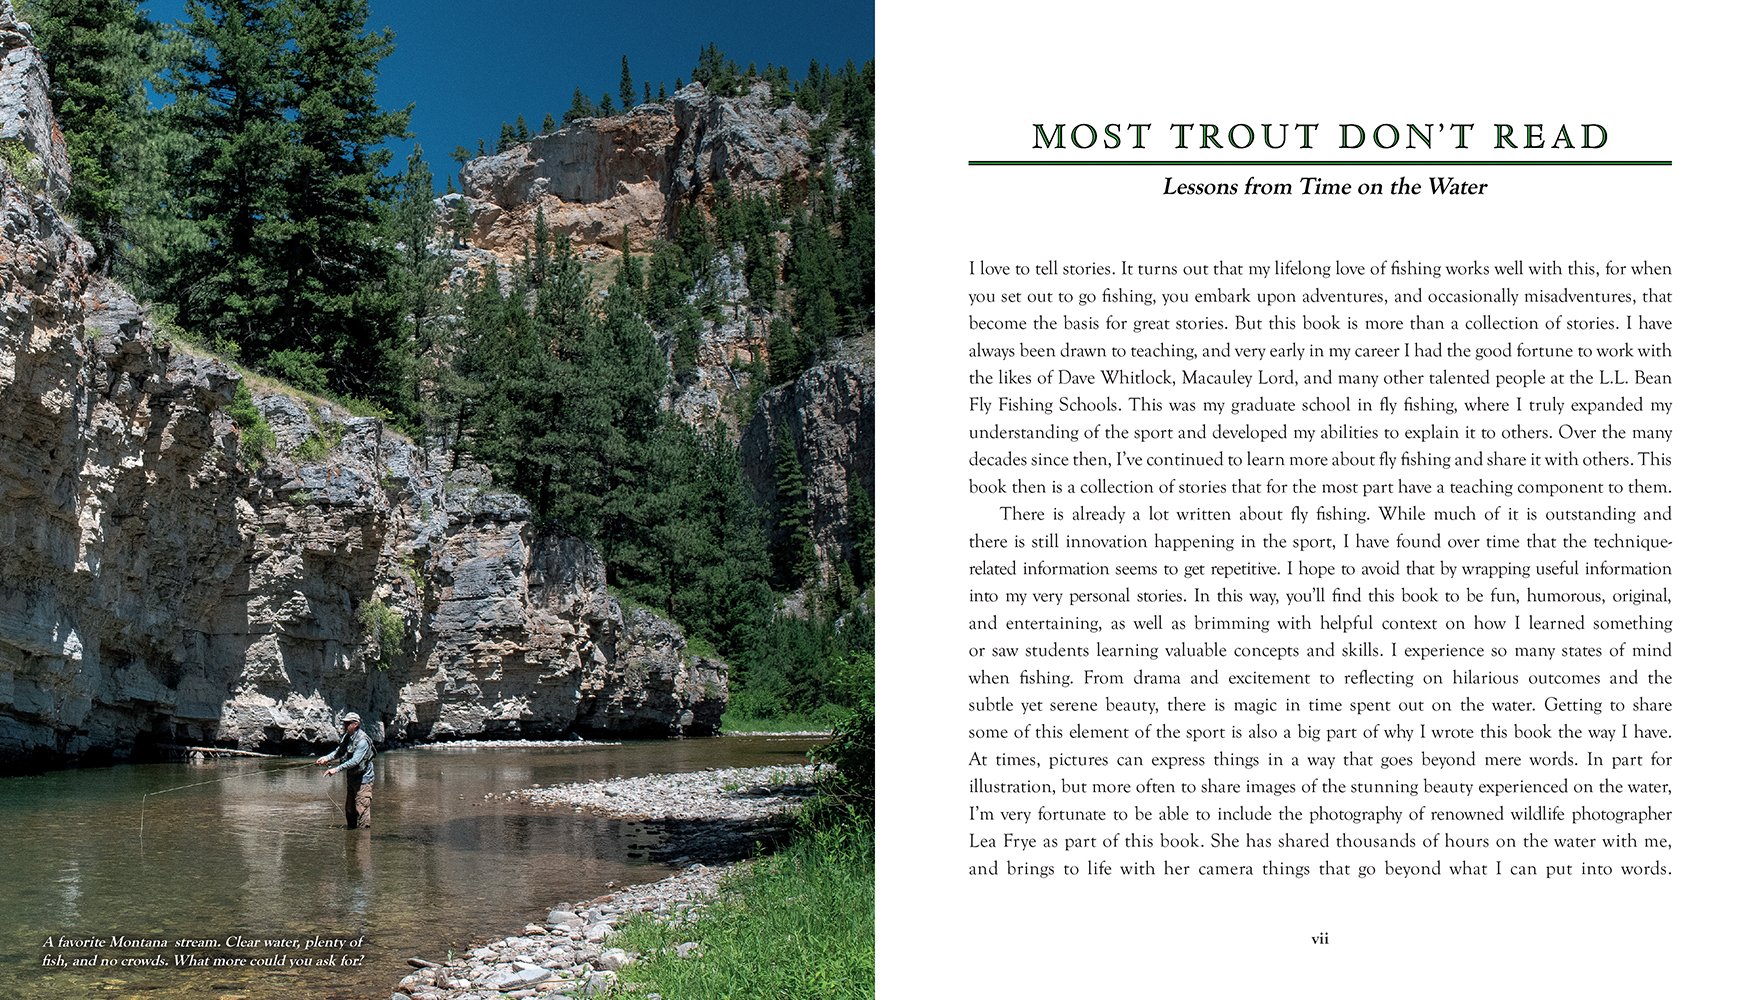 Most Trout Dont Read_INTERIOR SPREAD 1_1000px.jpg